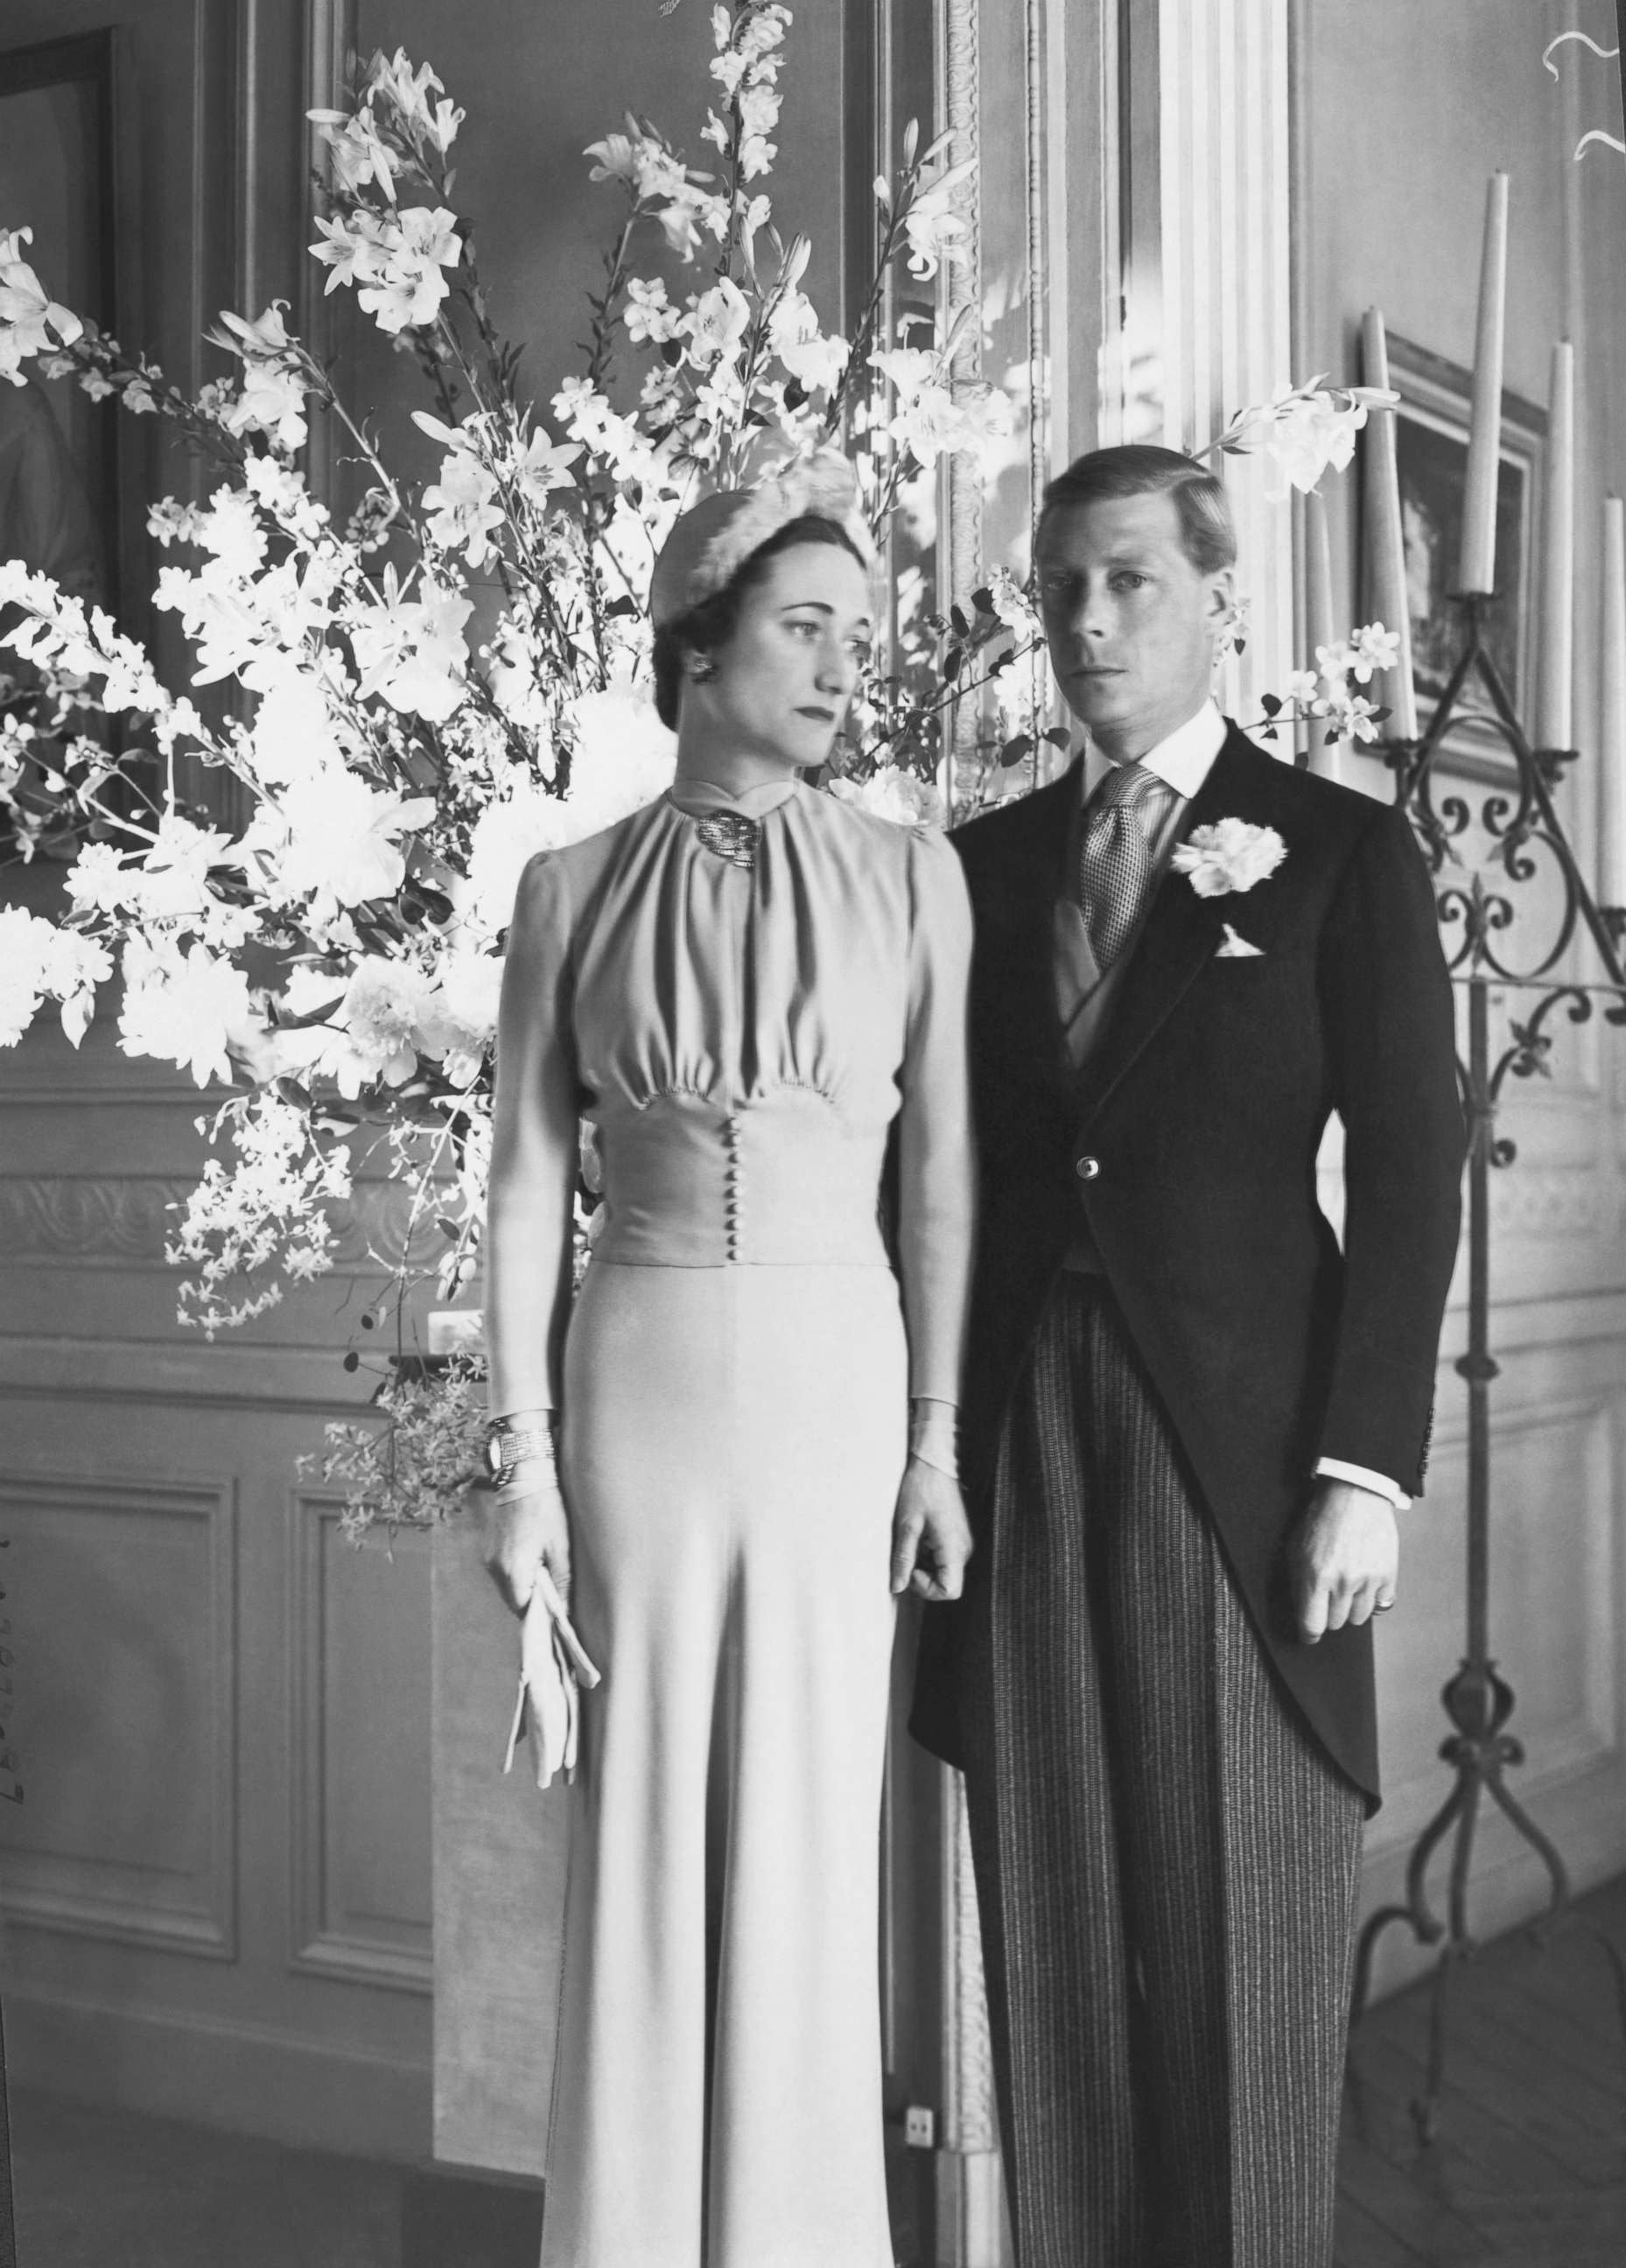 PHOTO: The Duke and Duchess of Windsor at the Chateau de Cande pose for a portrait after their wedding, Monts, France, June 3, 1937.